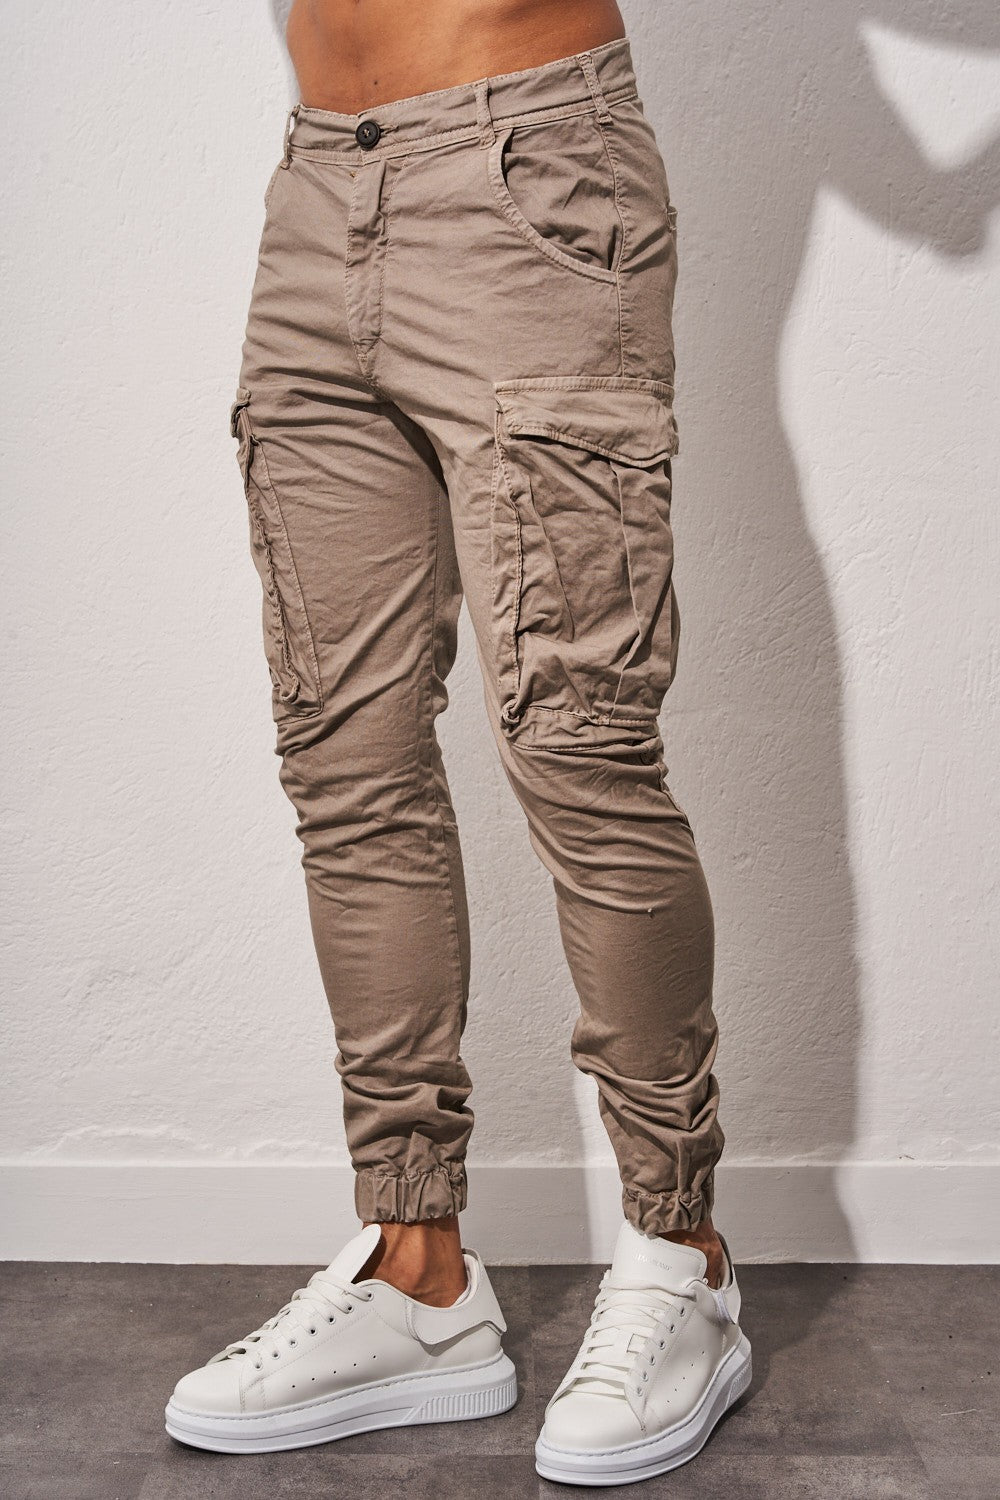 Back 2 cargo trousers